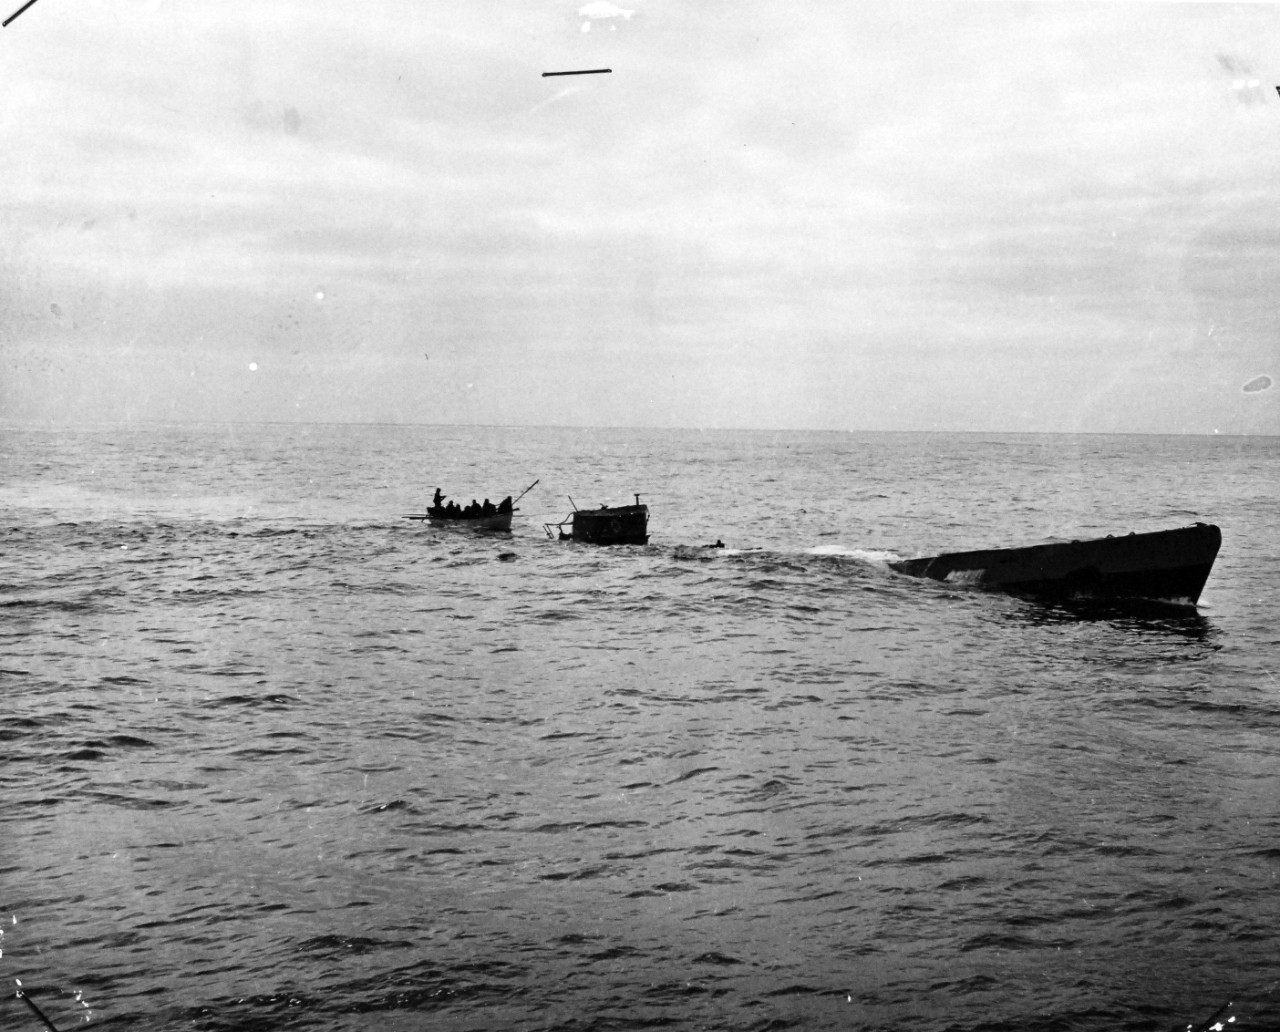 26-G-1514:  Sinking of German submarine U-175, April 1943.   The submarine was sunk off south-west of Ireland by USCGC Spencer (WPG-36) on April 17, 1943.  Original Caption, “COAST GUARD CUTTER SINKS SUB: Coast Guardsmen from the cutter USCGC SPENCER (WPG-36) picking up survivors from the Nazi U-Boat just before it made its final dive.  Meanwhile the convoy steamed on." Date: 17 April 1943   Official U.S. Coast Guard Photograph, now in the collections of the National Archives.  (2017/09/05).